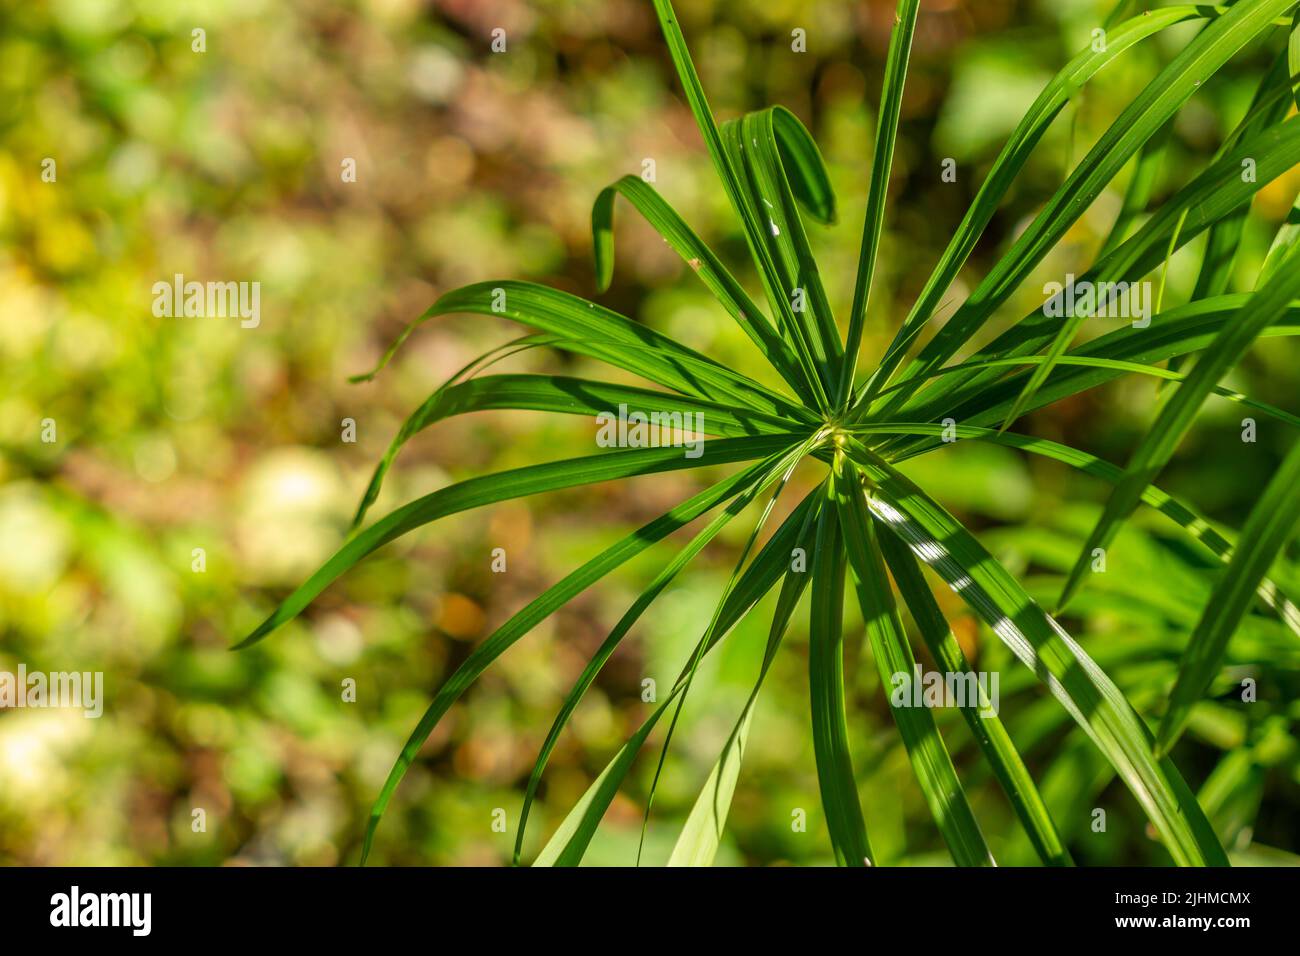 The leaves of the umbrella sedge plant in the form of small blades spread out to form like an umbrella, isolated on a blurry background Stock Photo